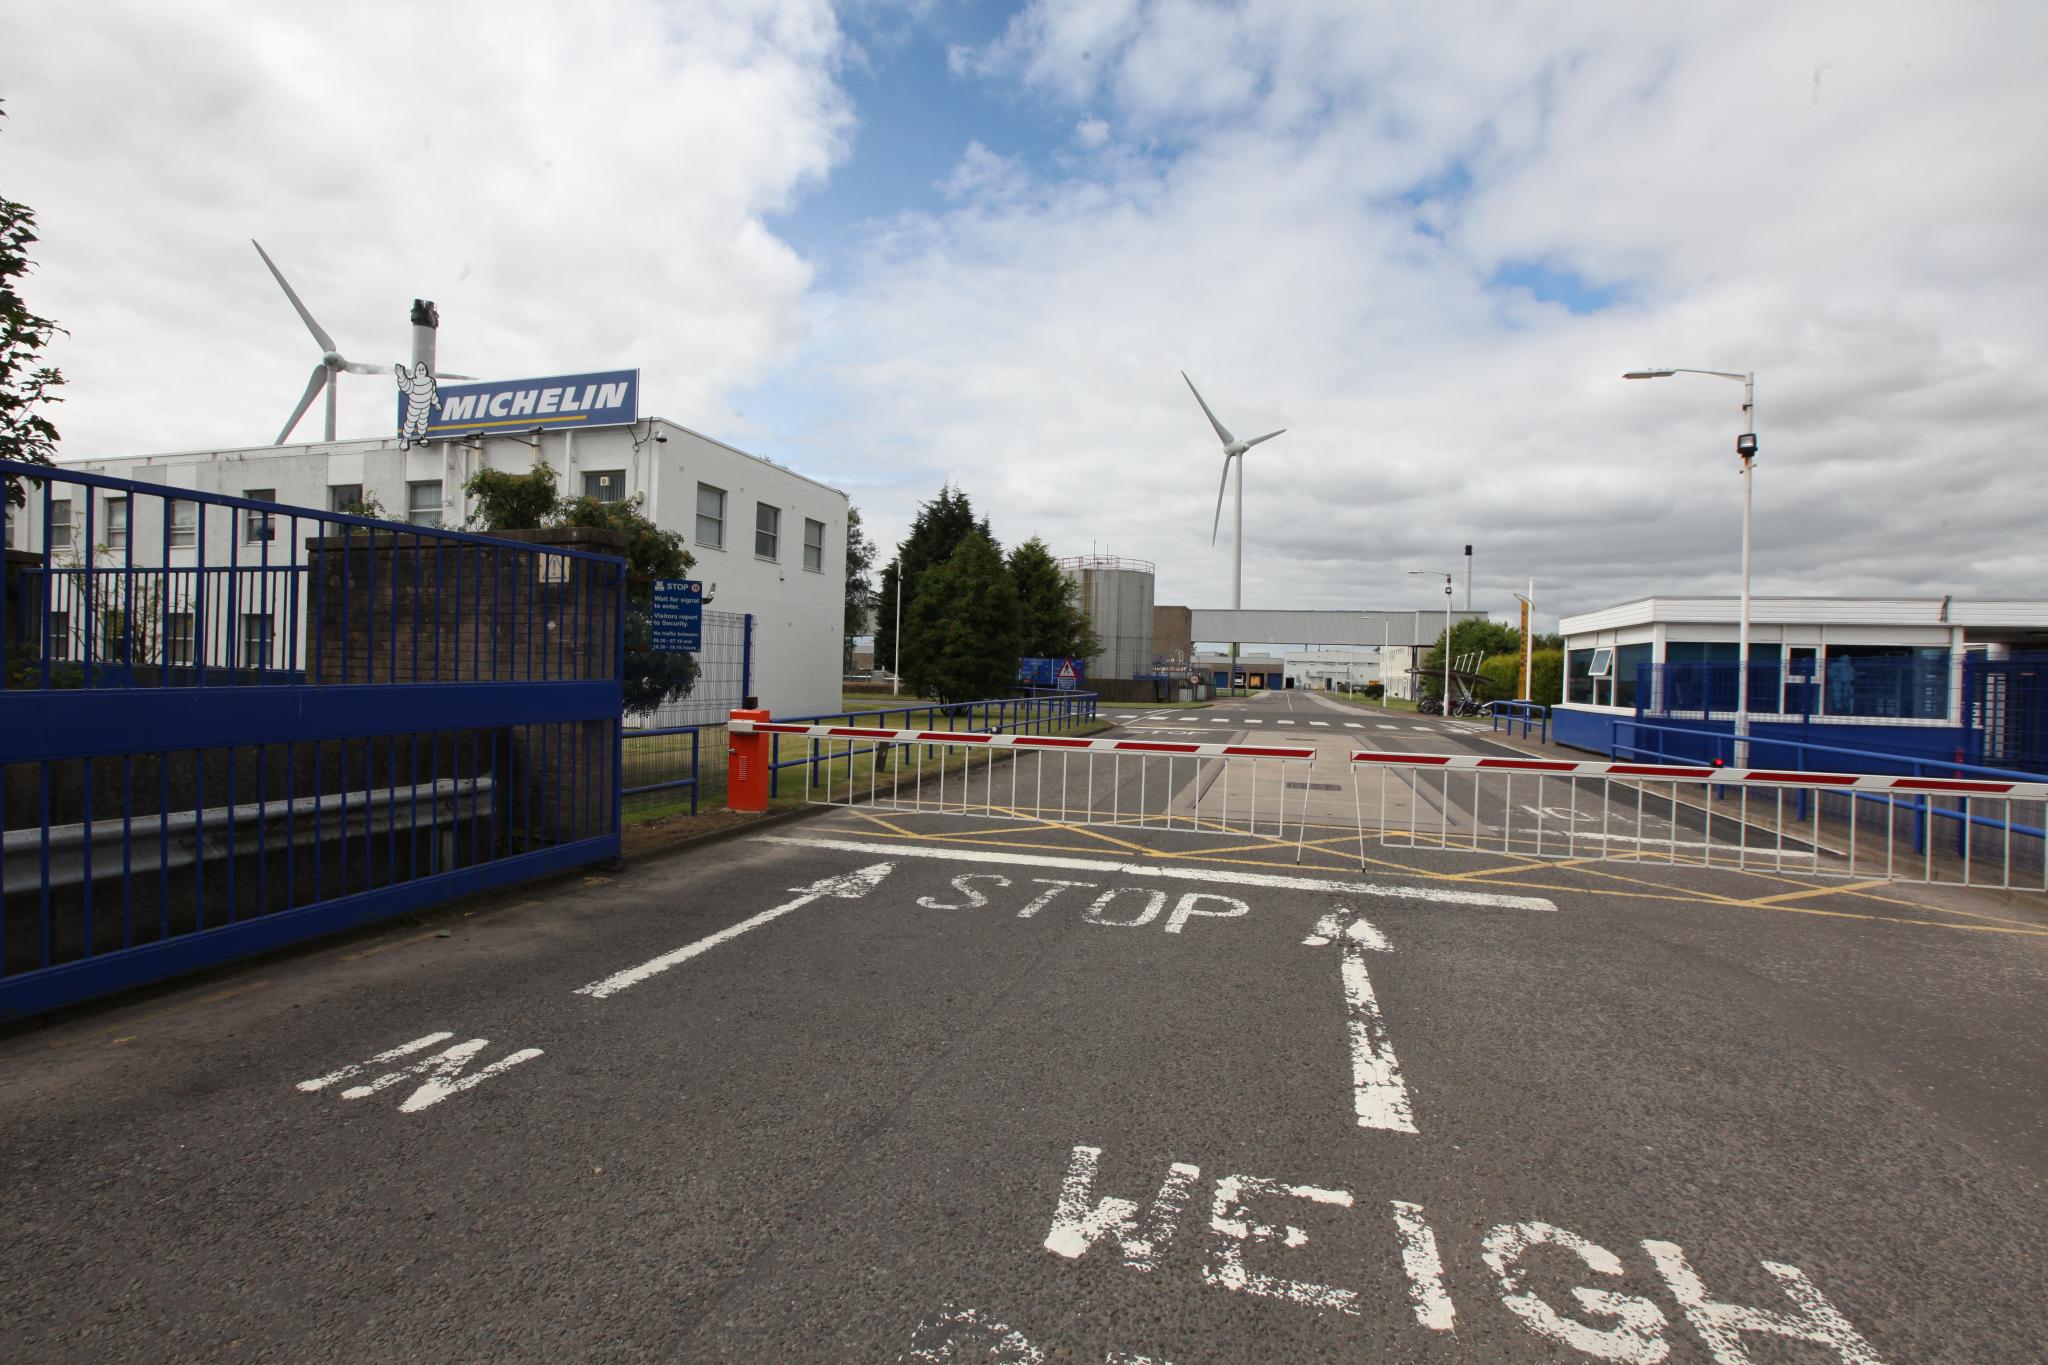 Dundee closure ‘supports Michelin’s intent to accelerate cost savings’ – analyst report